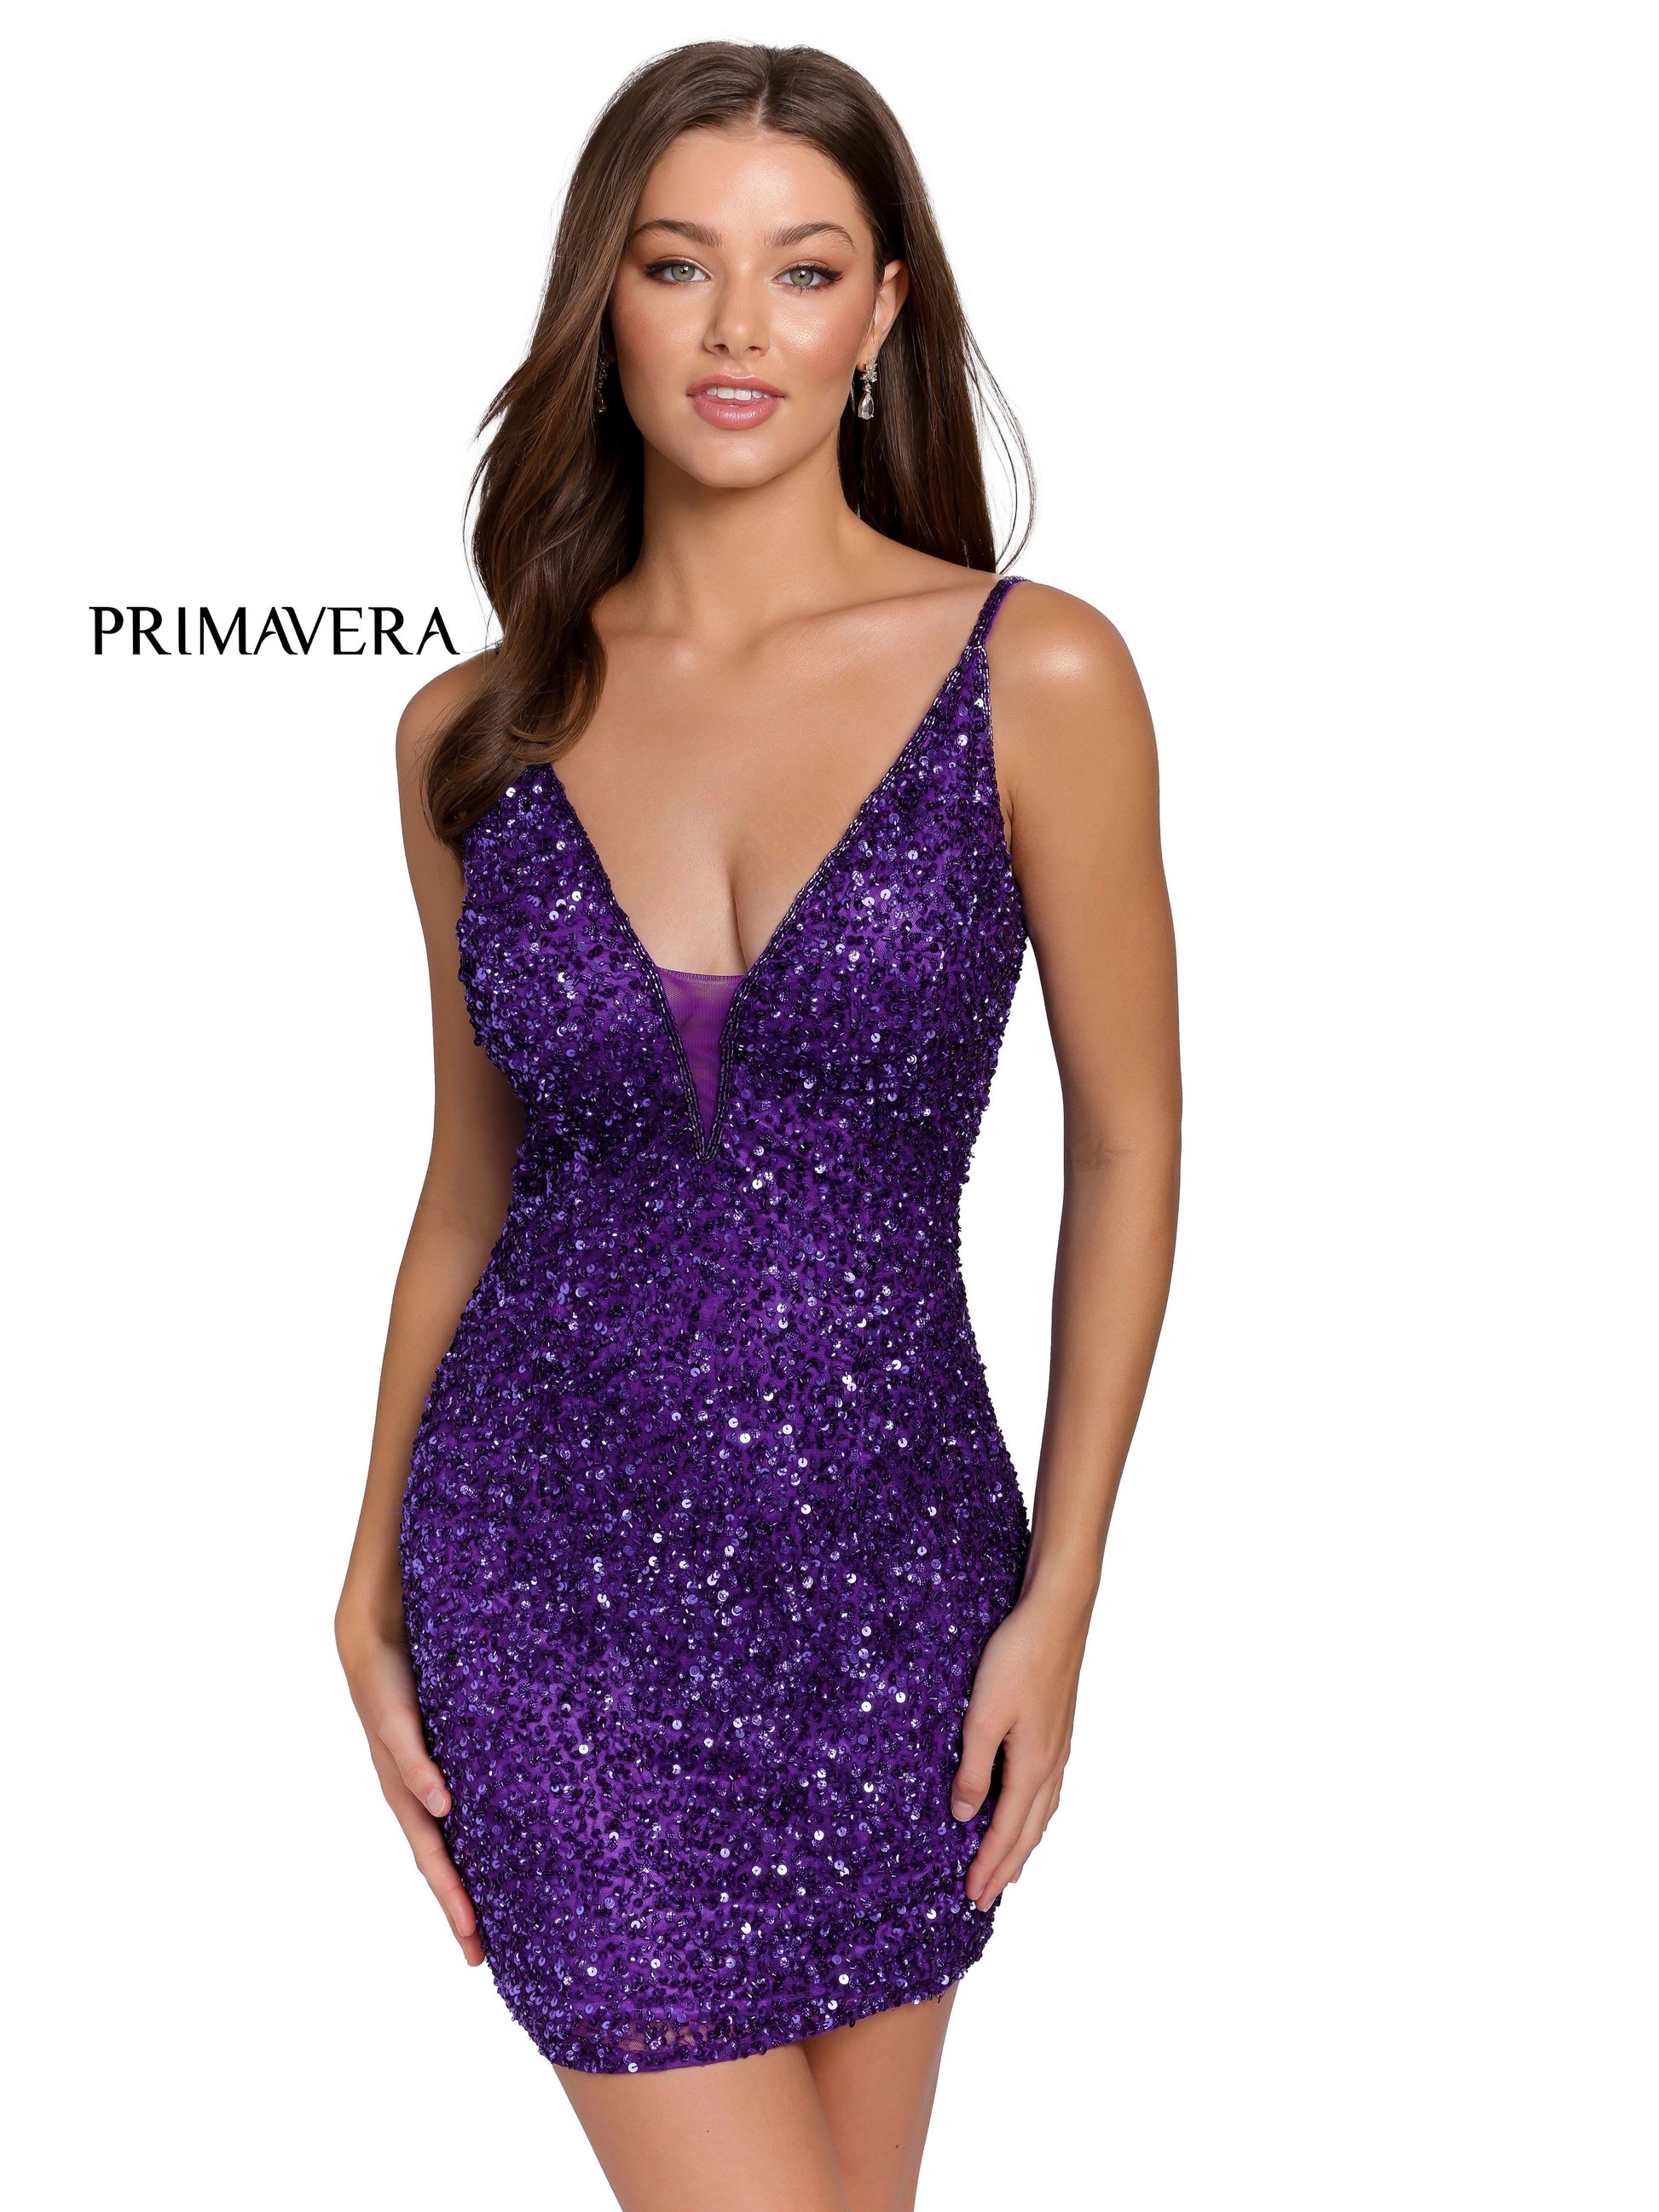 Primavera Couture 3572 Be the star in this Short Cocktail Dress.  This dress stands out in a crowd and features a strappy open back with a plunging neckline and sheer panel. Perfect for Homecoming or any Formal Party.  Available Colors:  Blush, Blue, Forest Green, Hot Pink, Ivory, Midnight, Pink, Powder Blue, Red  Available sizes:  00-18